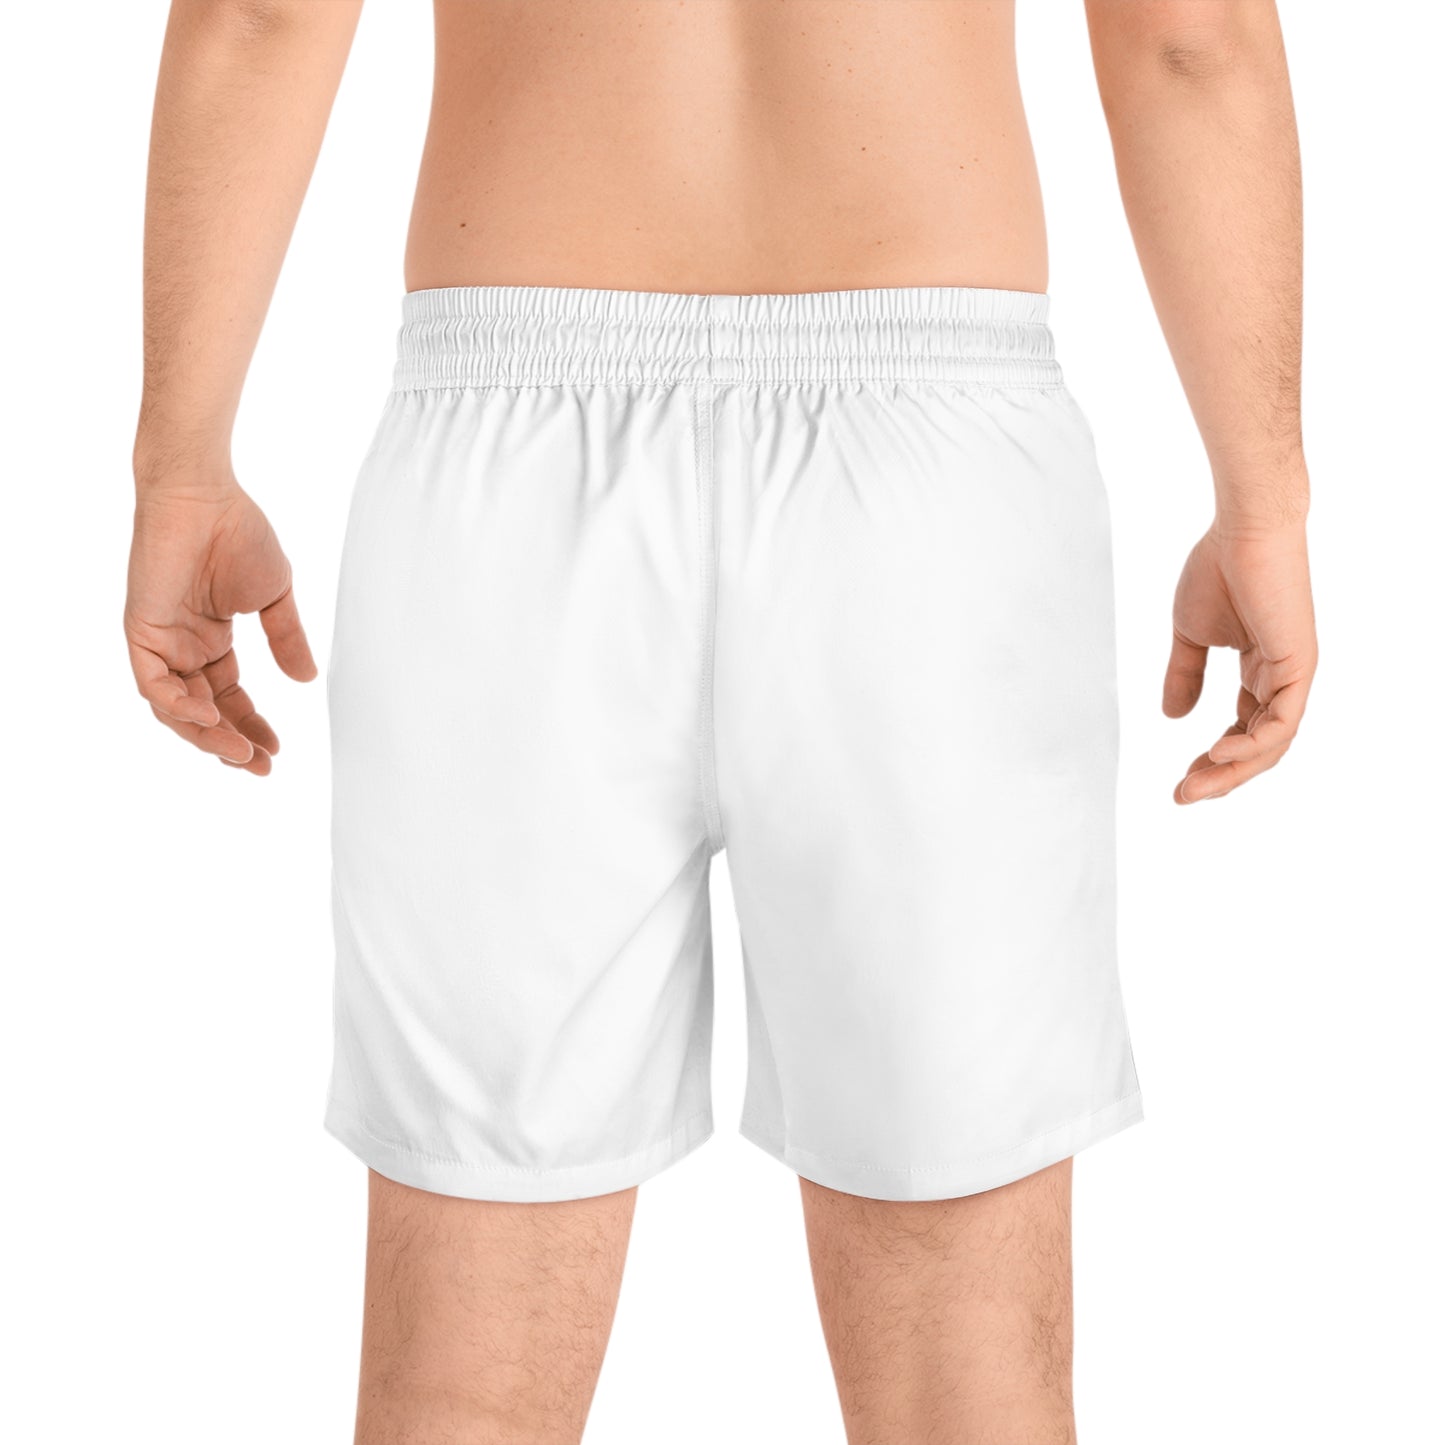 Stay In Spirit/ Fostered by the Father Men's Mid-Length Swim Shorts